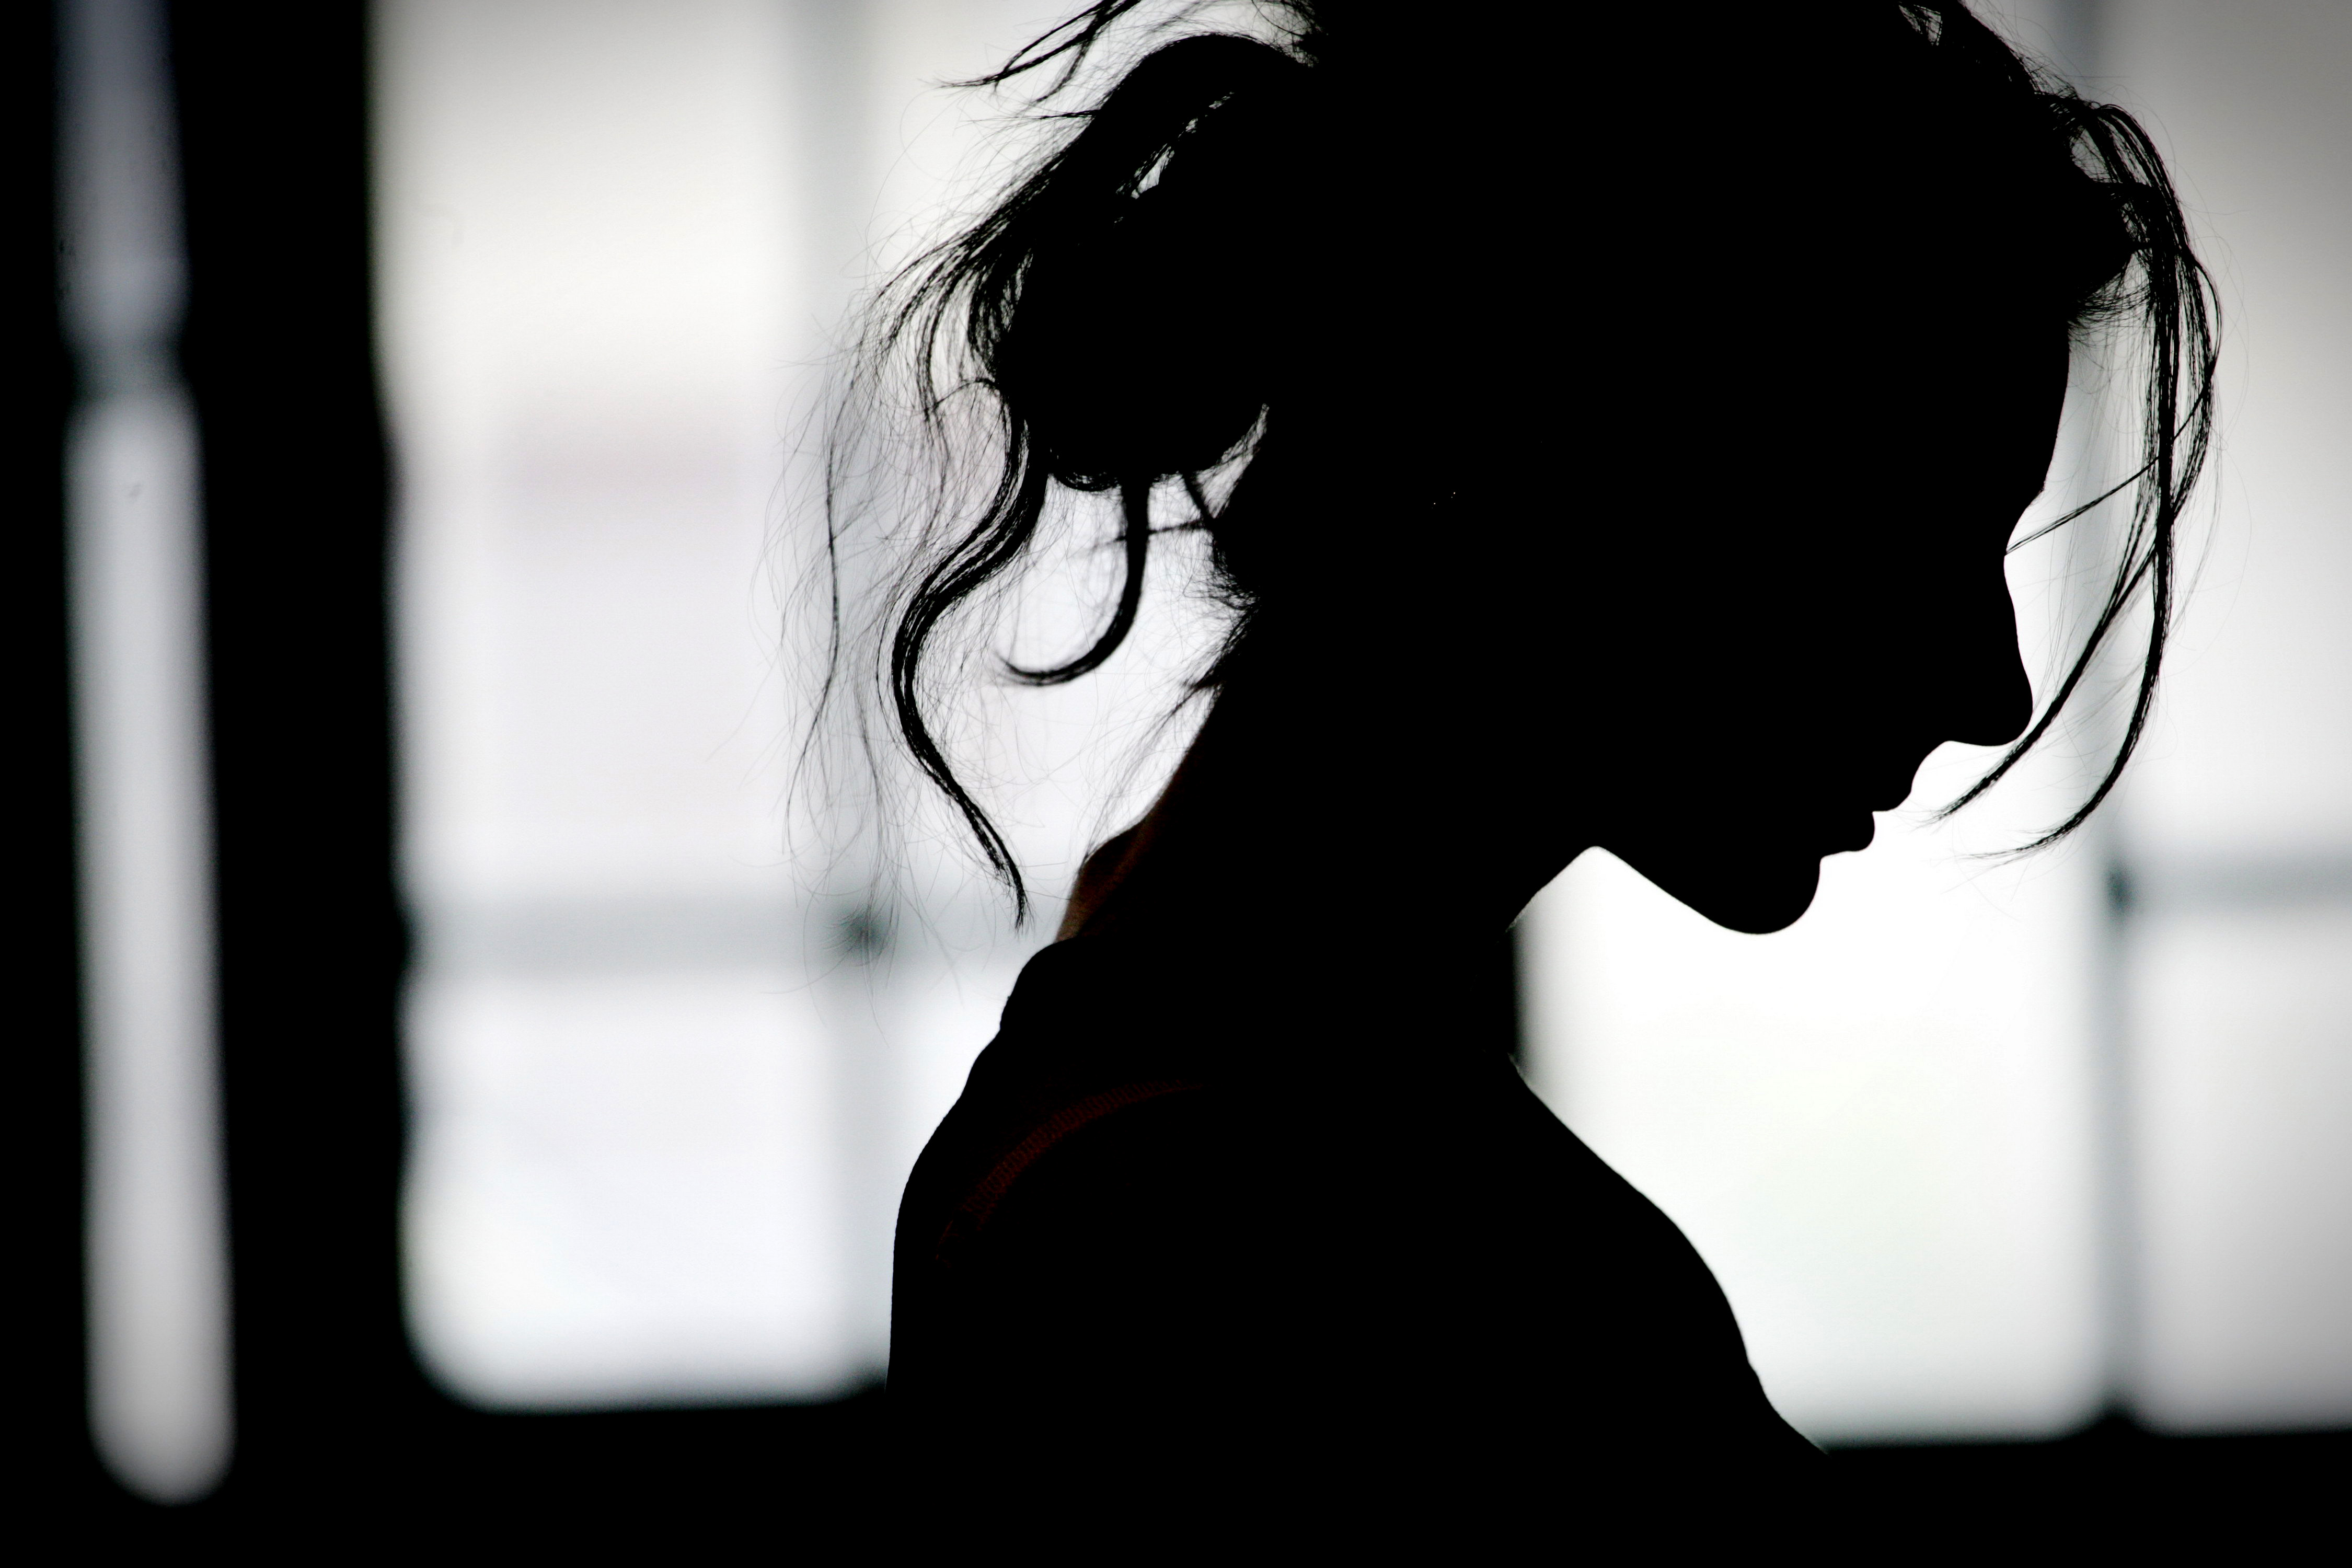 Human Trafficking Victims Deserve Greater Access to Second Chances